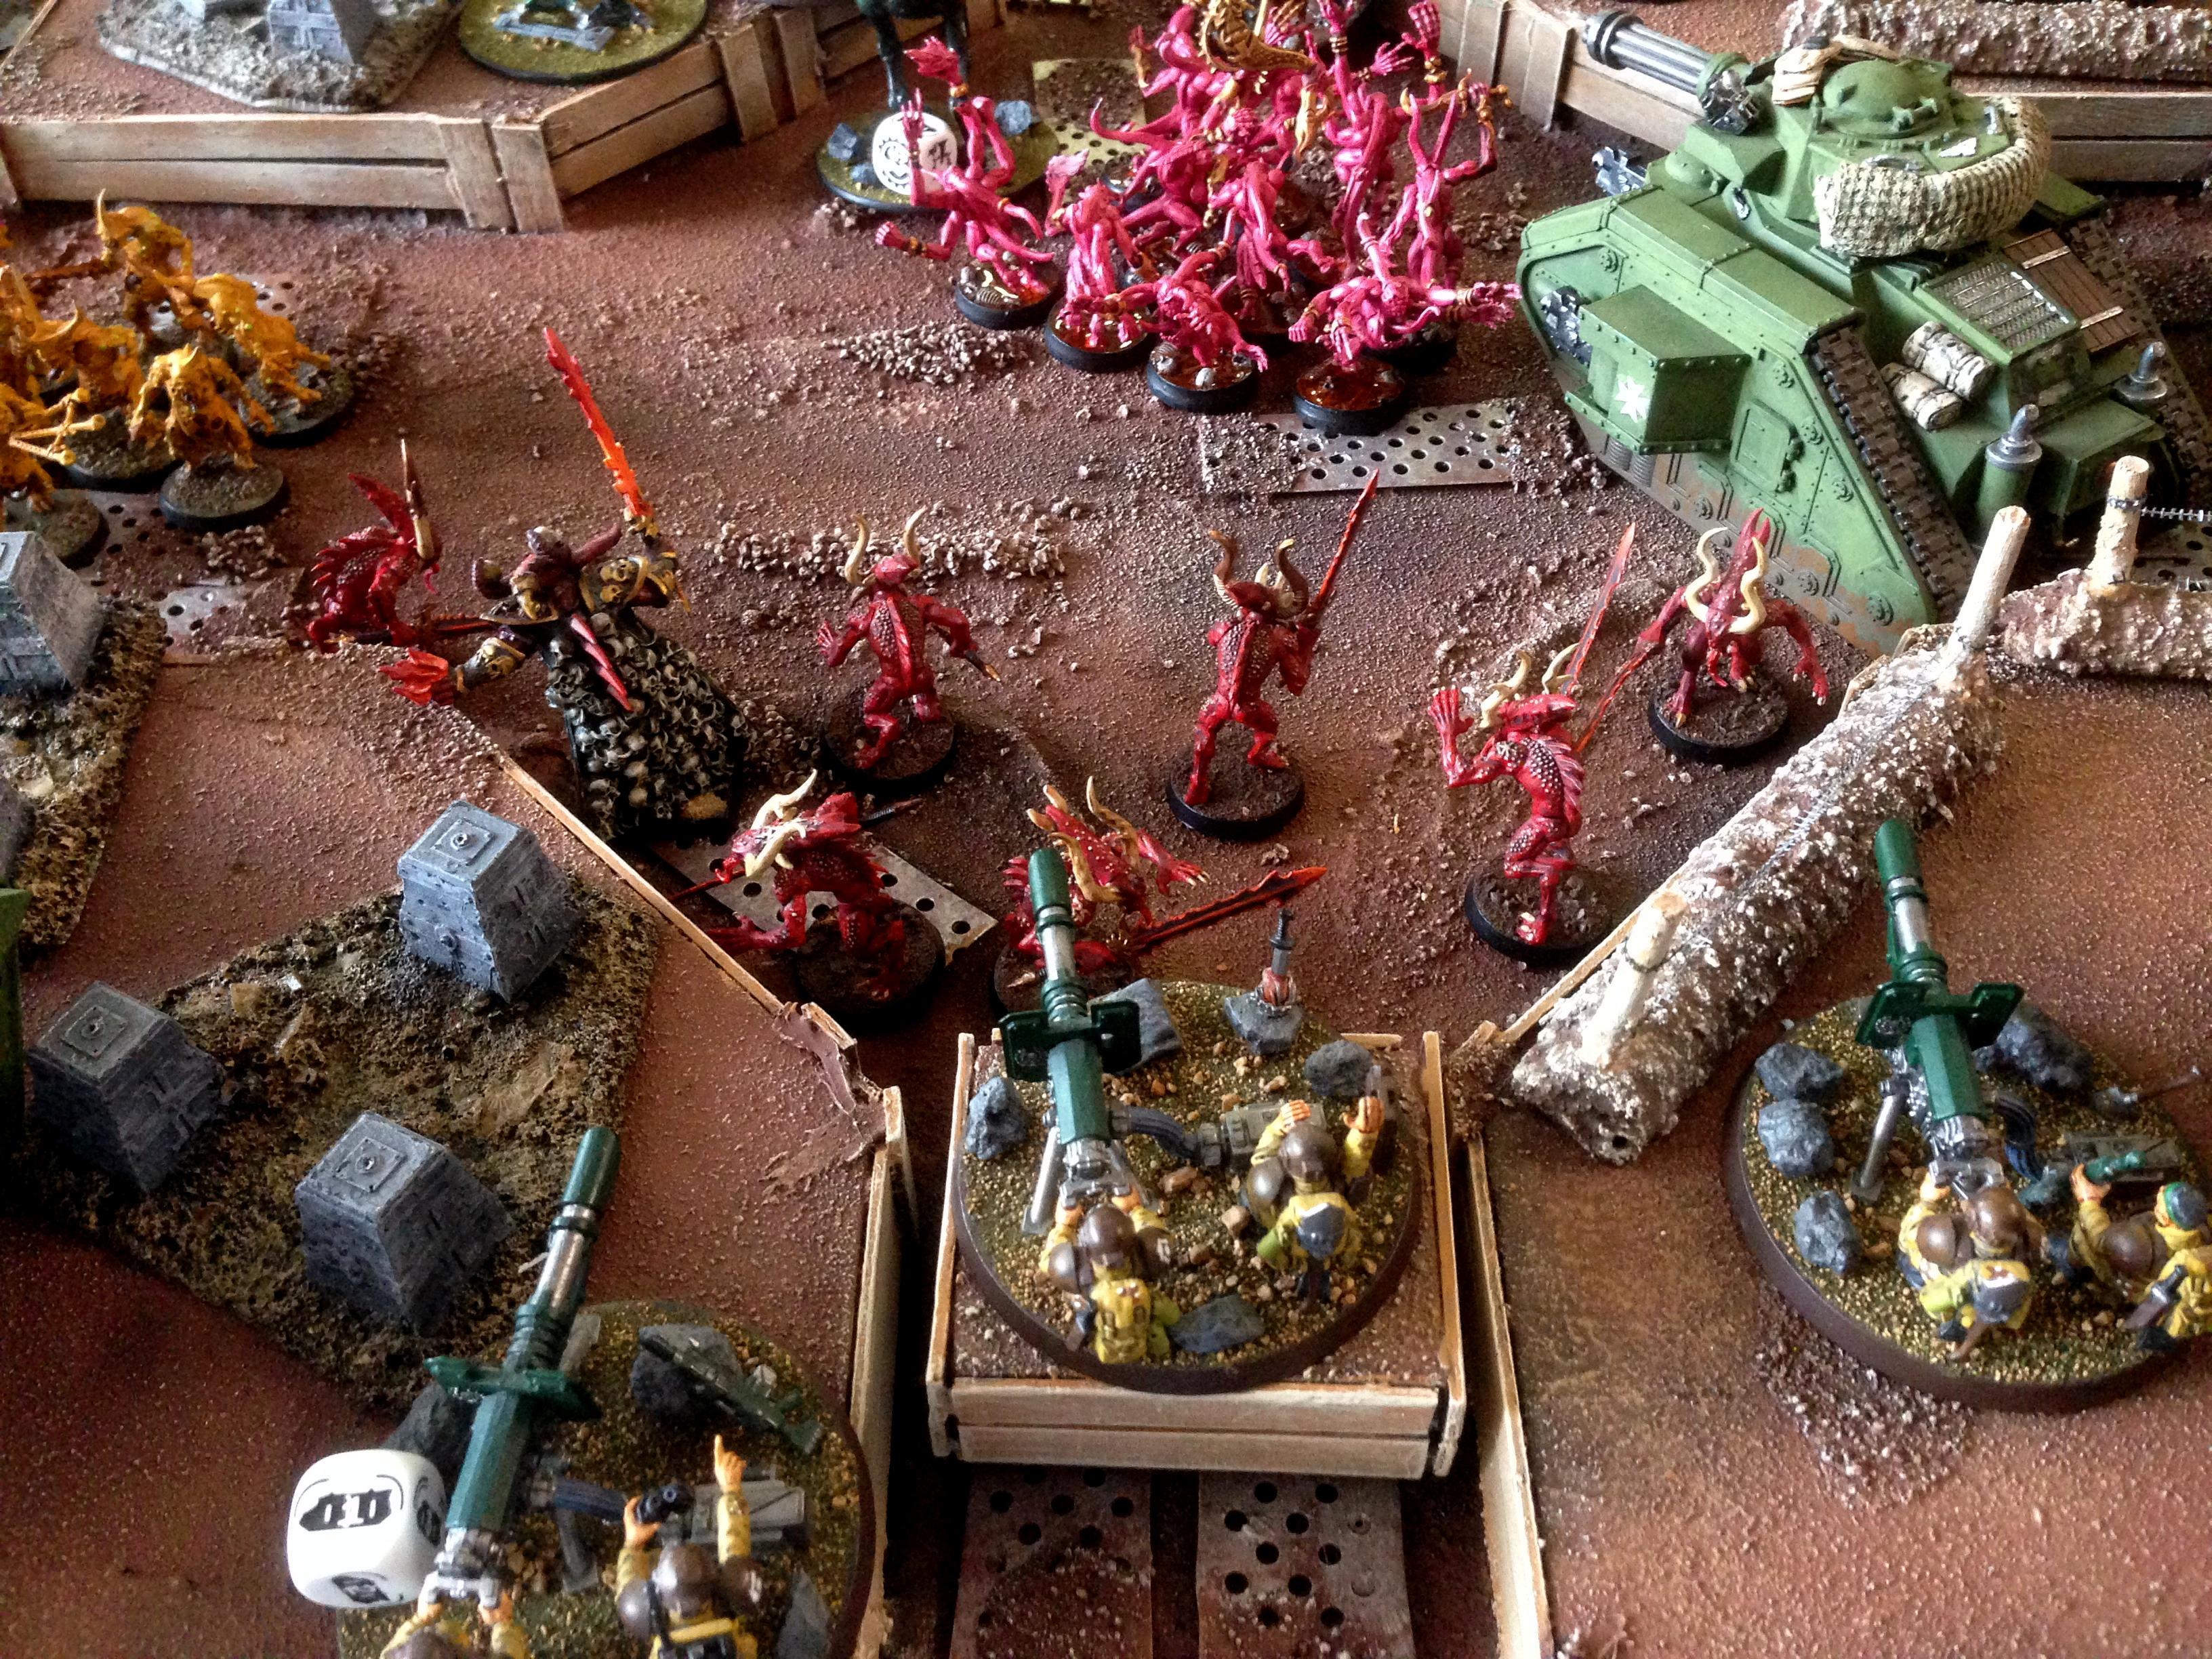 Apocalypse, Battle Report, Chaos, Chaos Space Marines, Daemons, Iron Warriors